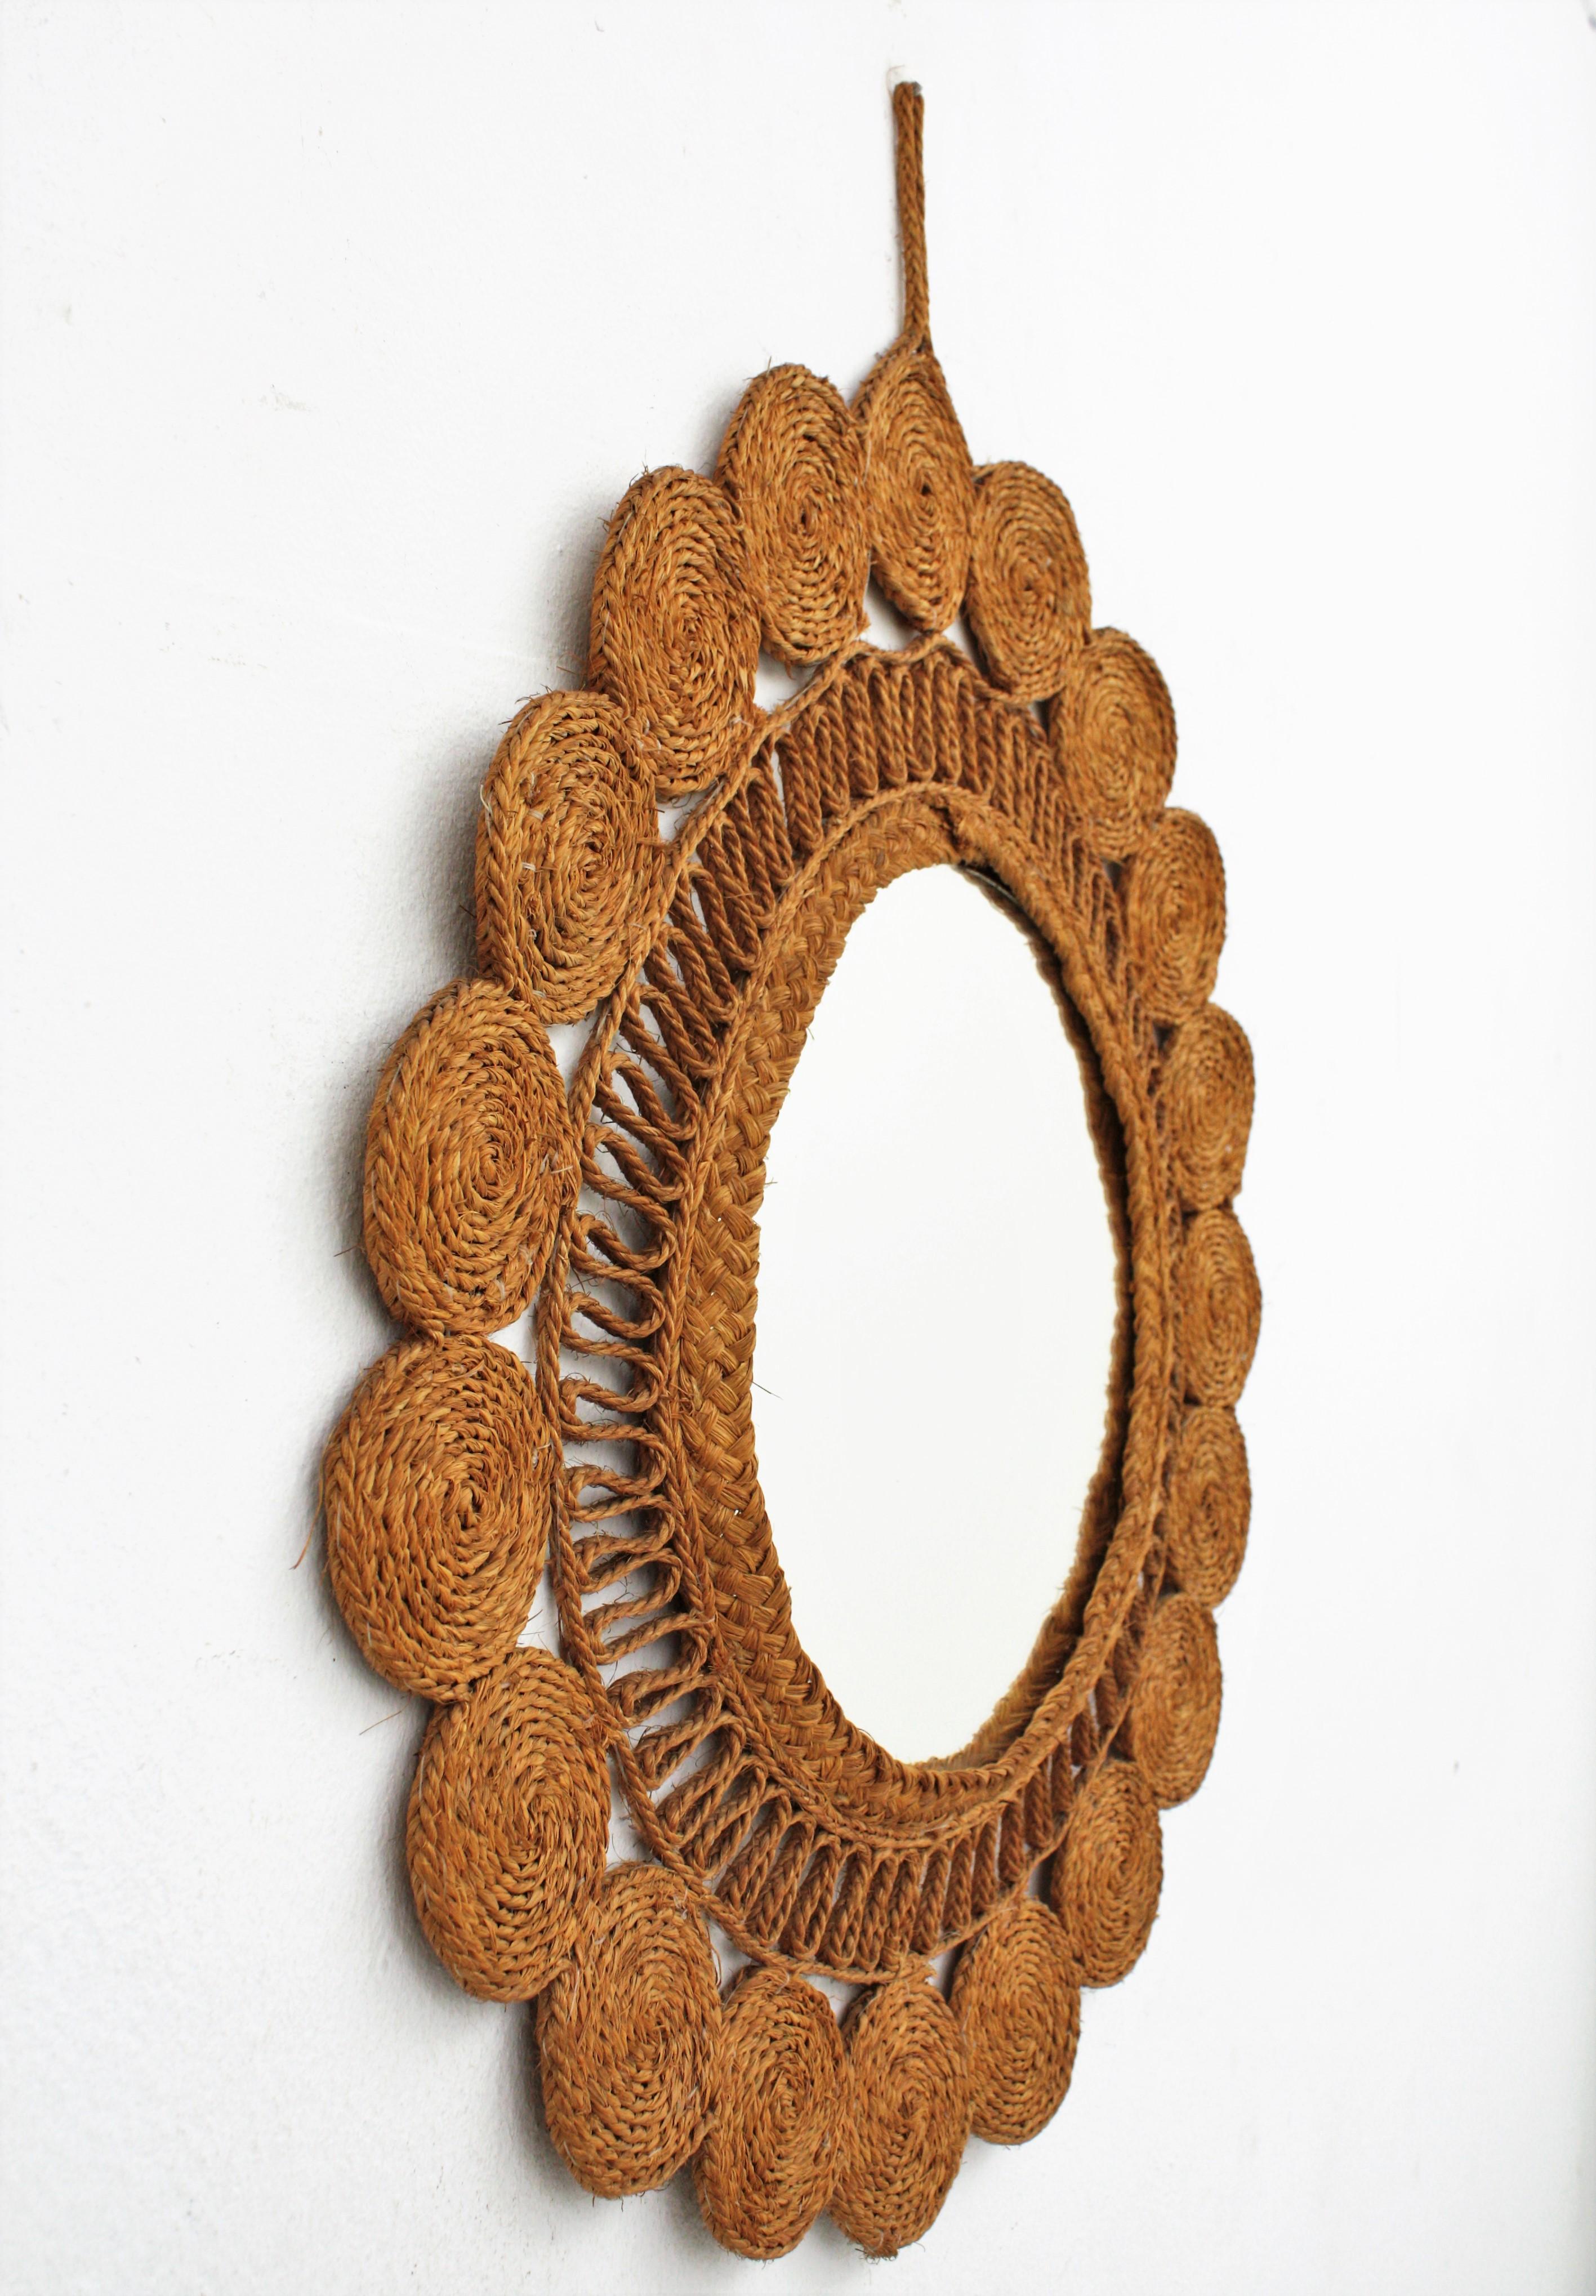 Natural Fiber Woven Esparto Rope Wall Mirror, Spain, 1960s For Sale